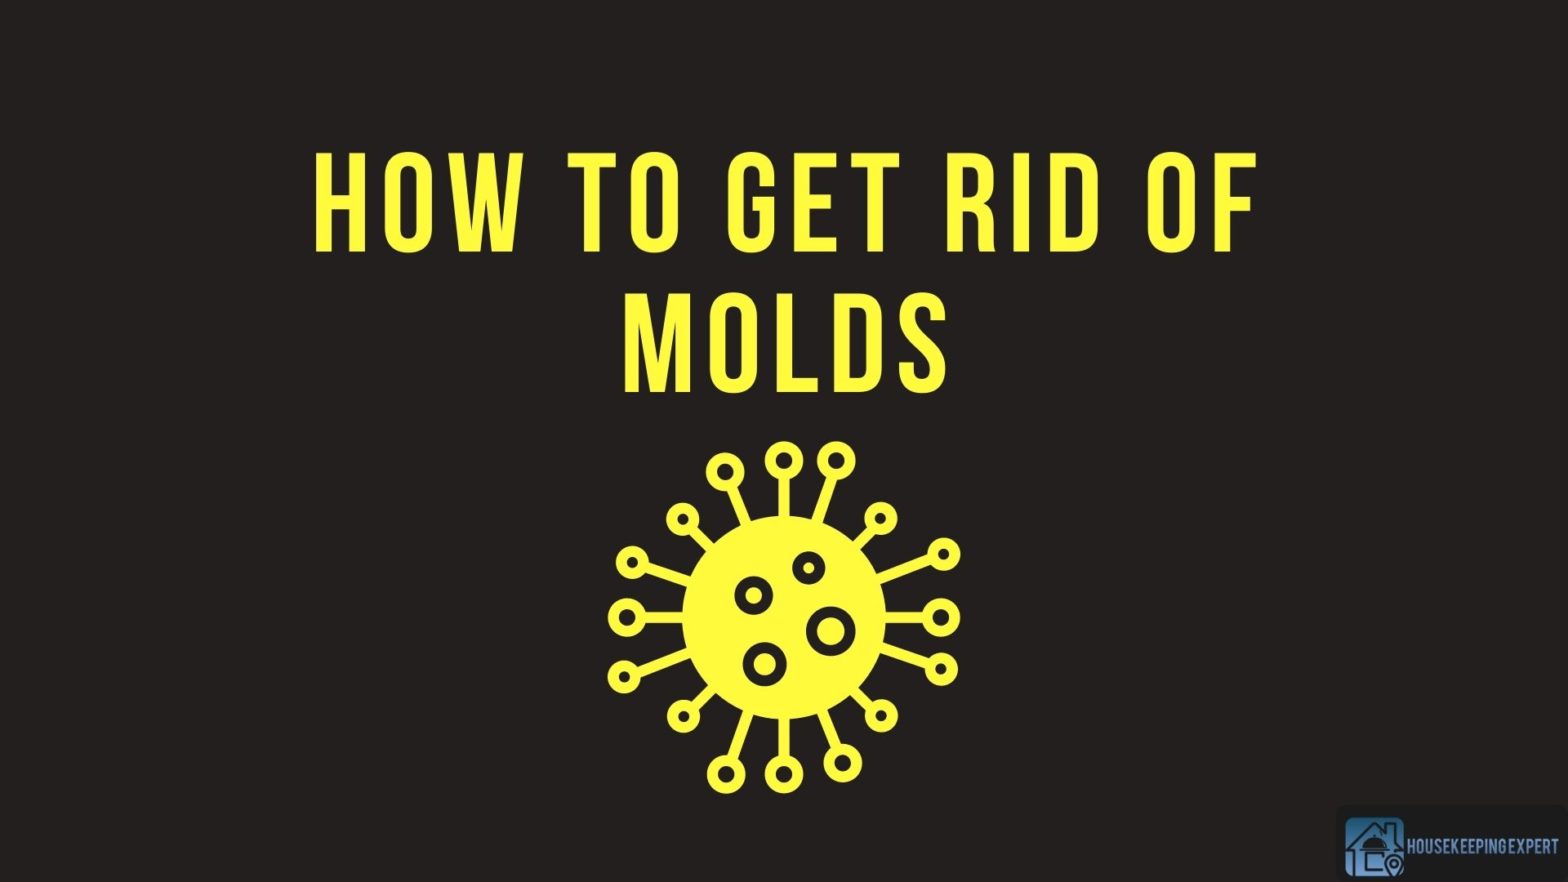 How To Get Rid Of Molds